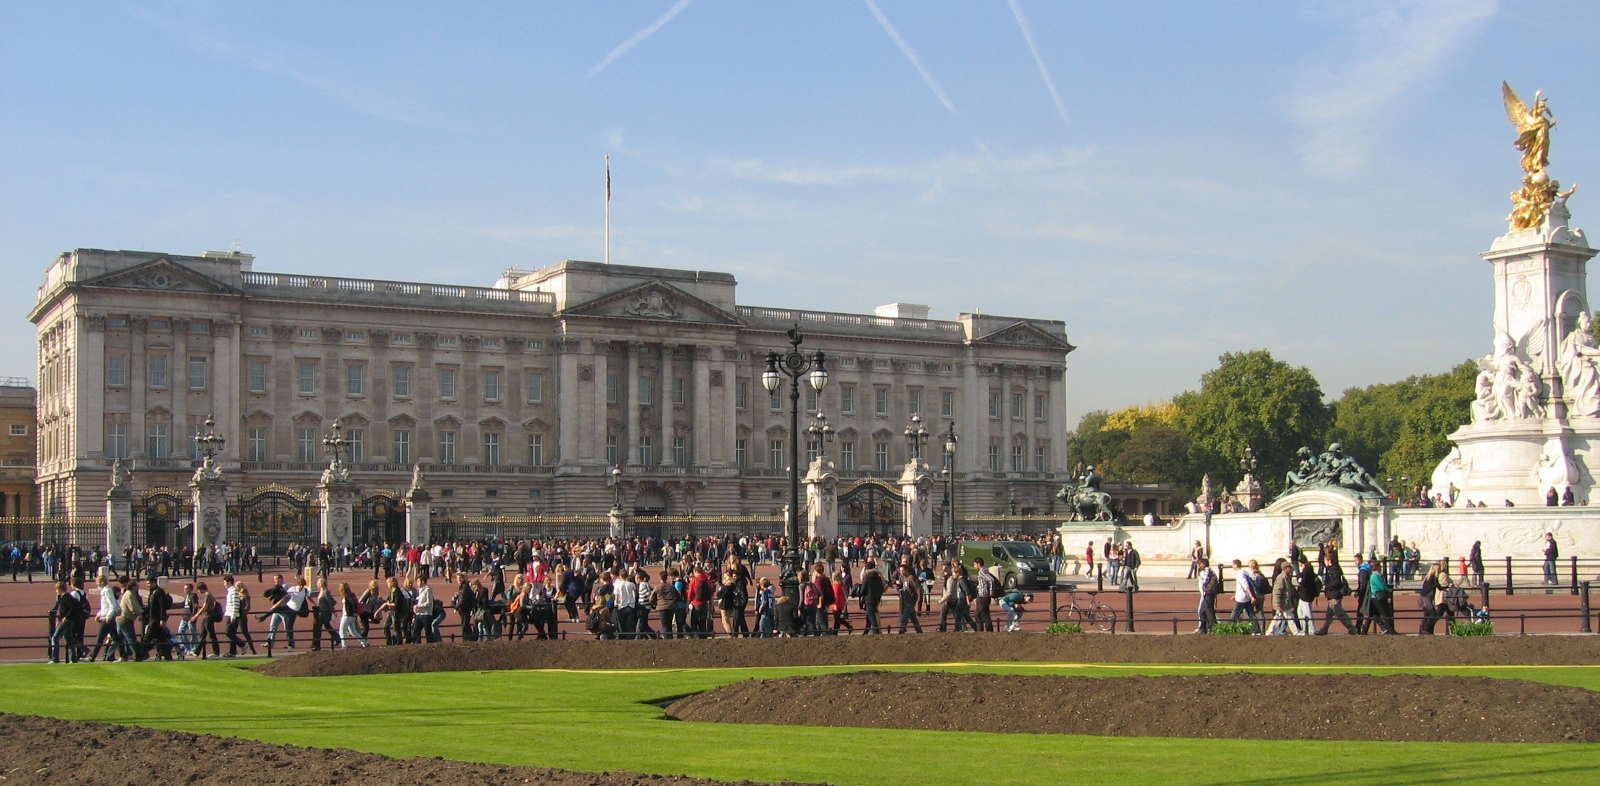 Buckingham Palace and the Victoria Memorial